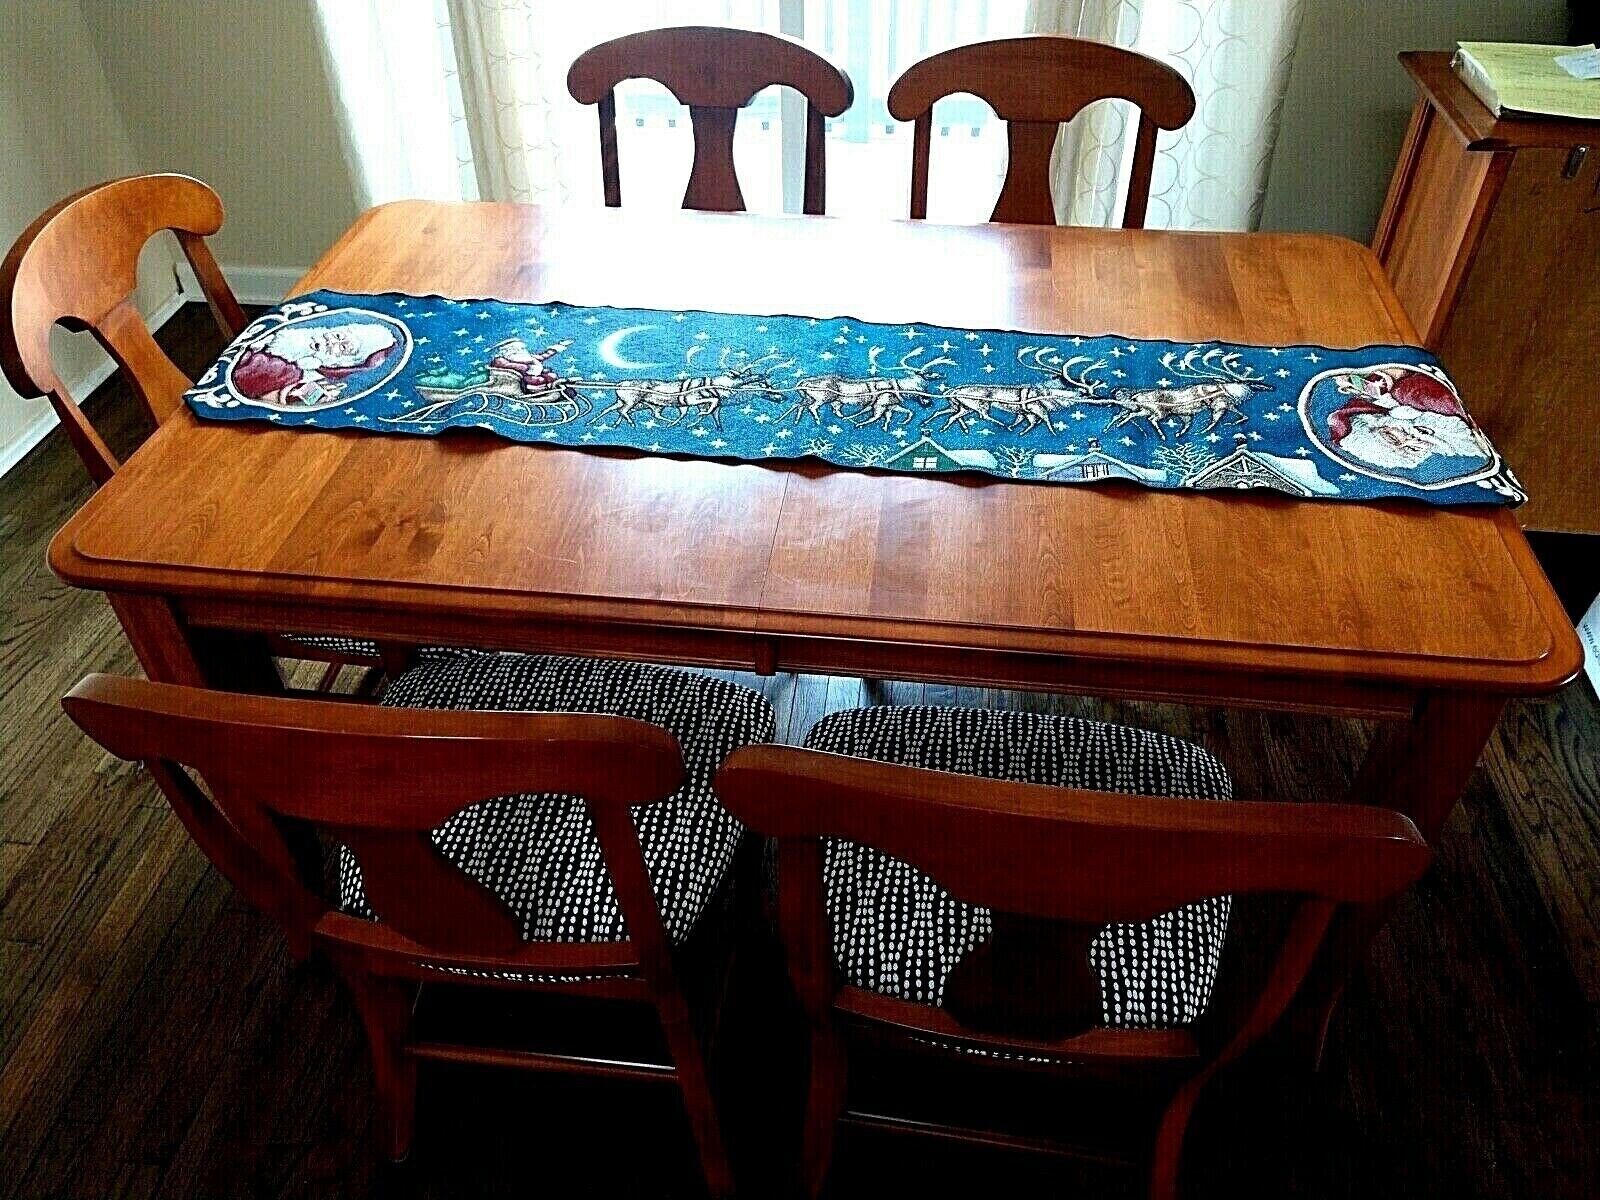 SANTA IN HIS SLEIGH 8 REINDEER NAVY BLUE RUNNER TABLE x Free Shipping Cheap Max 61% OFF Bargain Gift 13